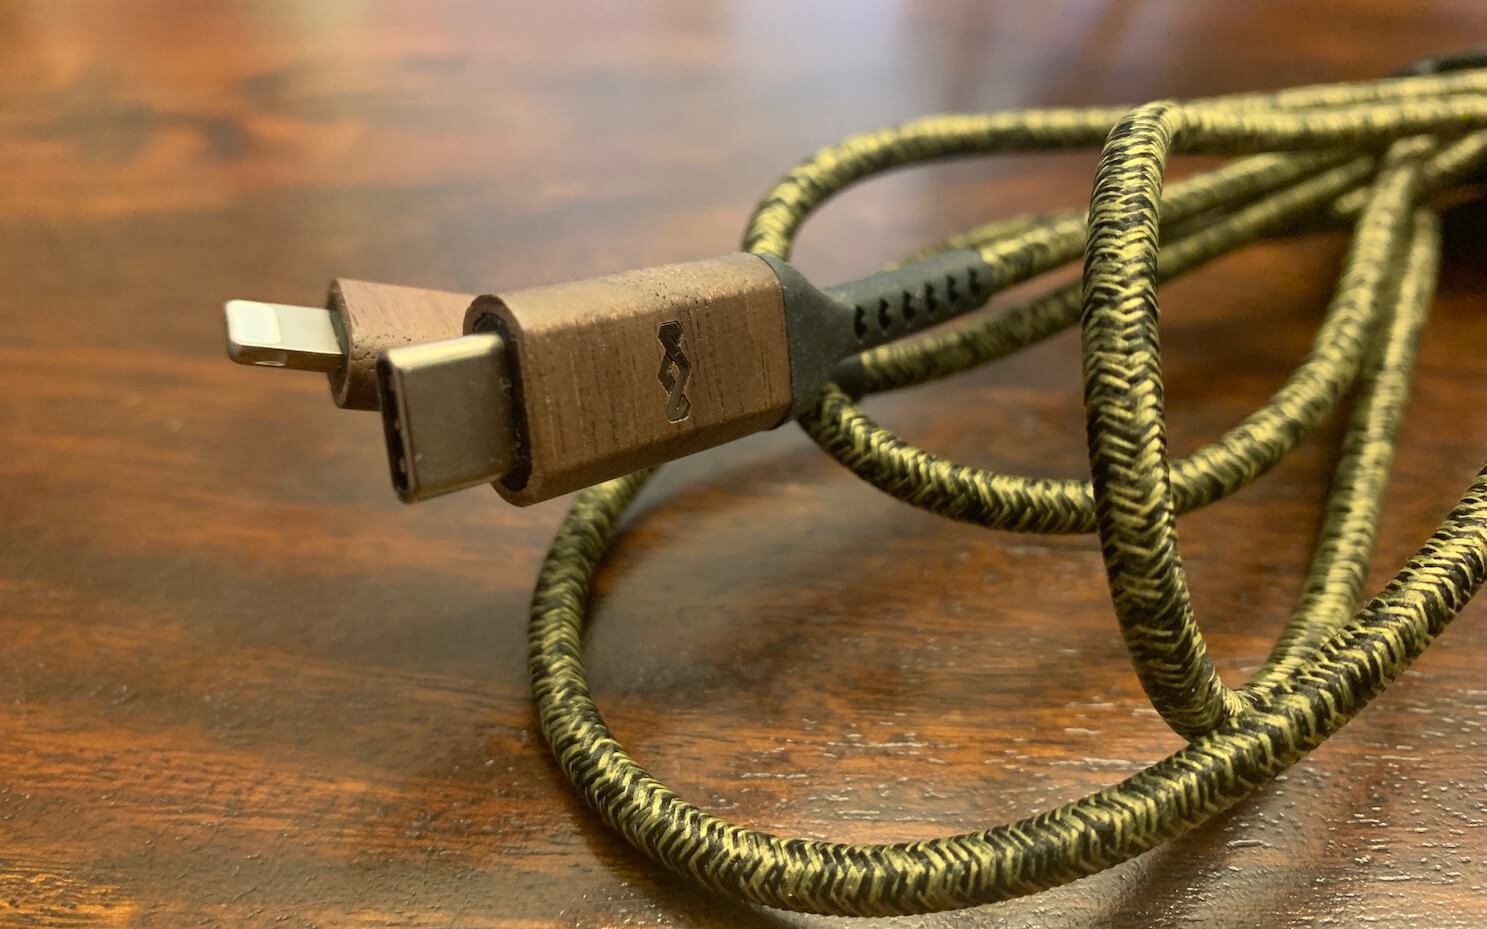 House of Marley cables